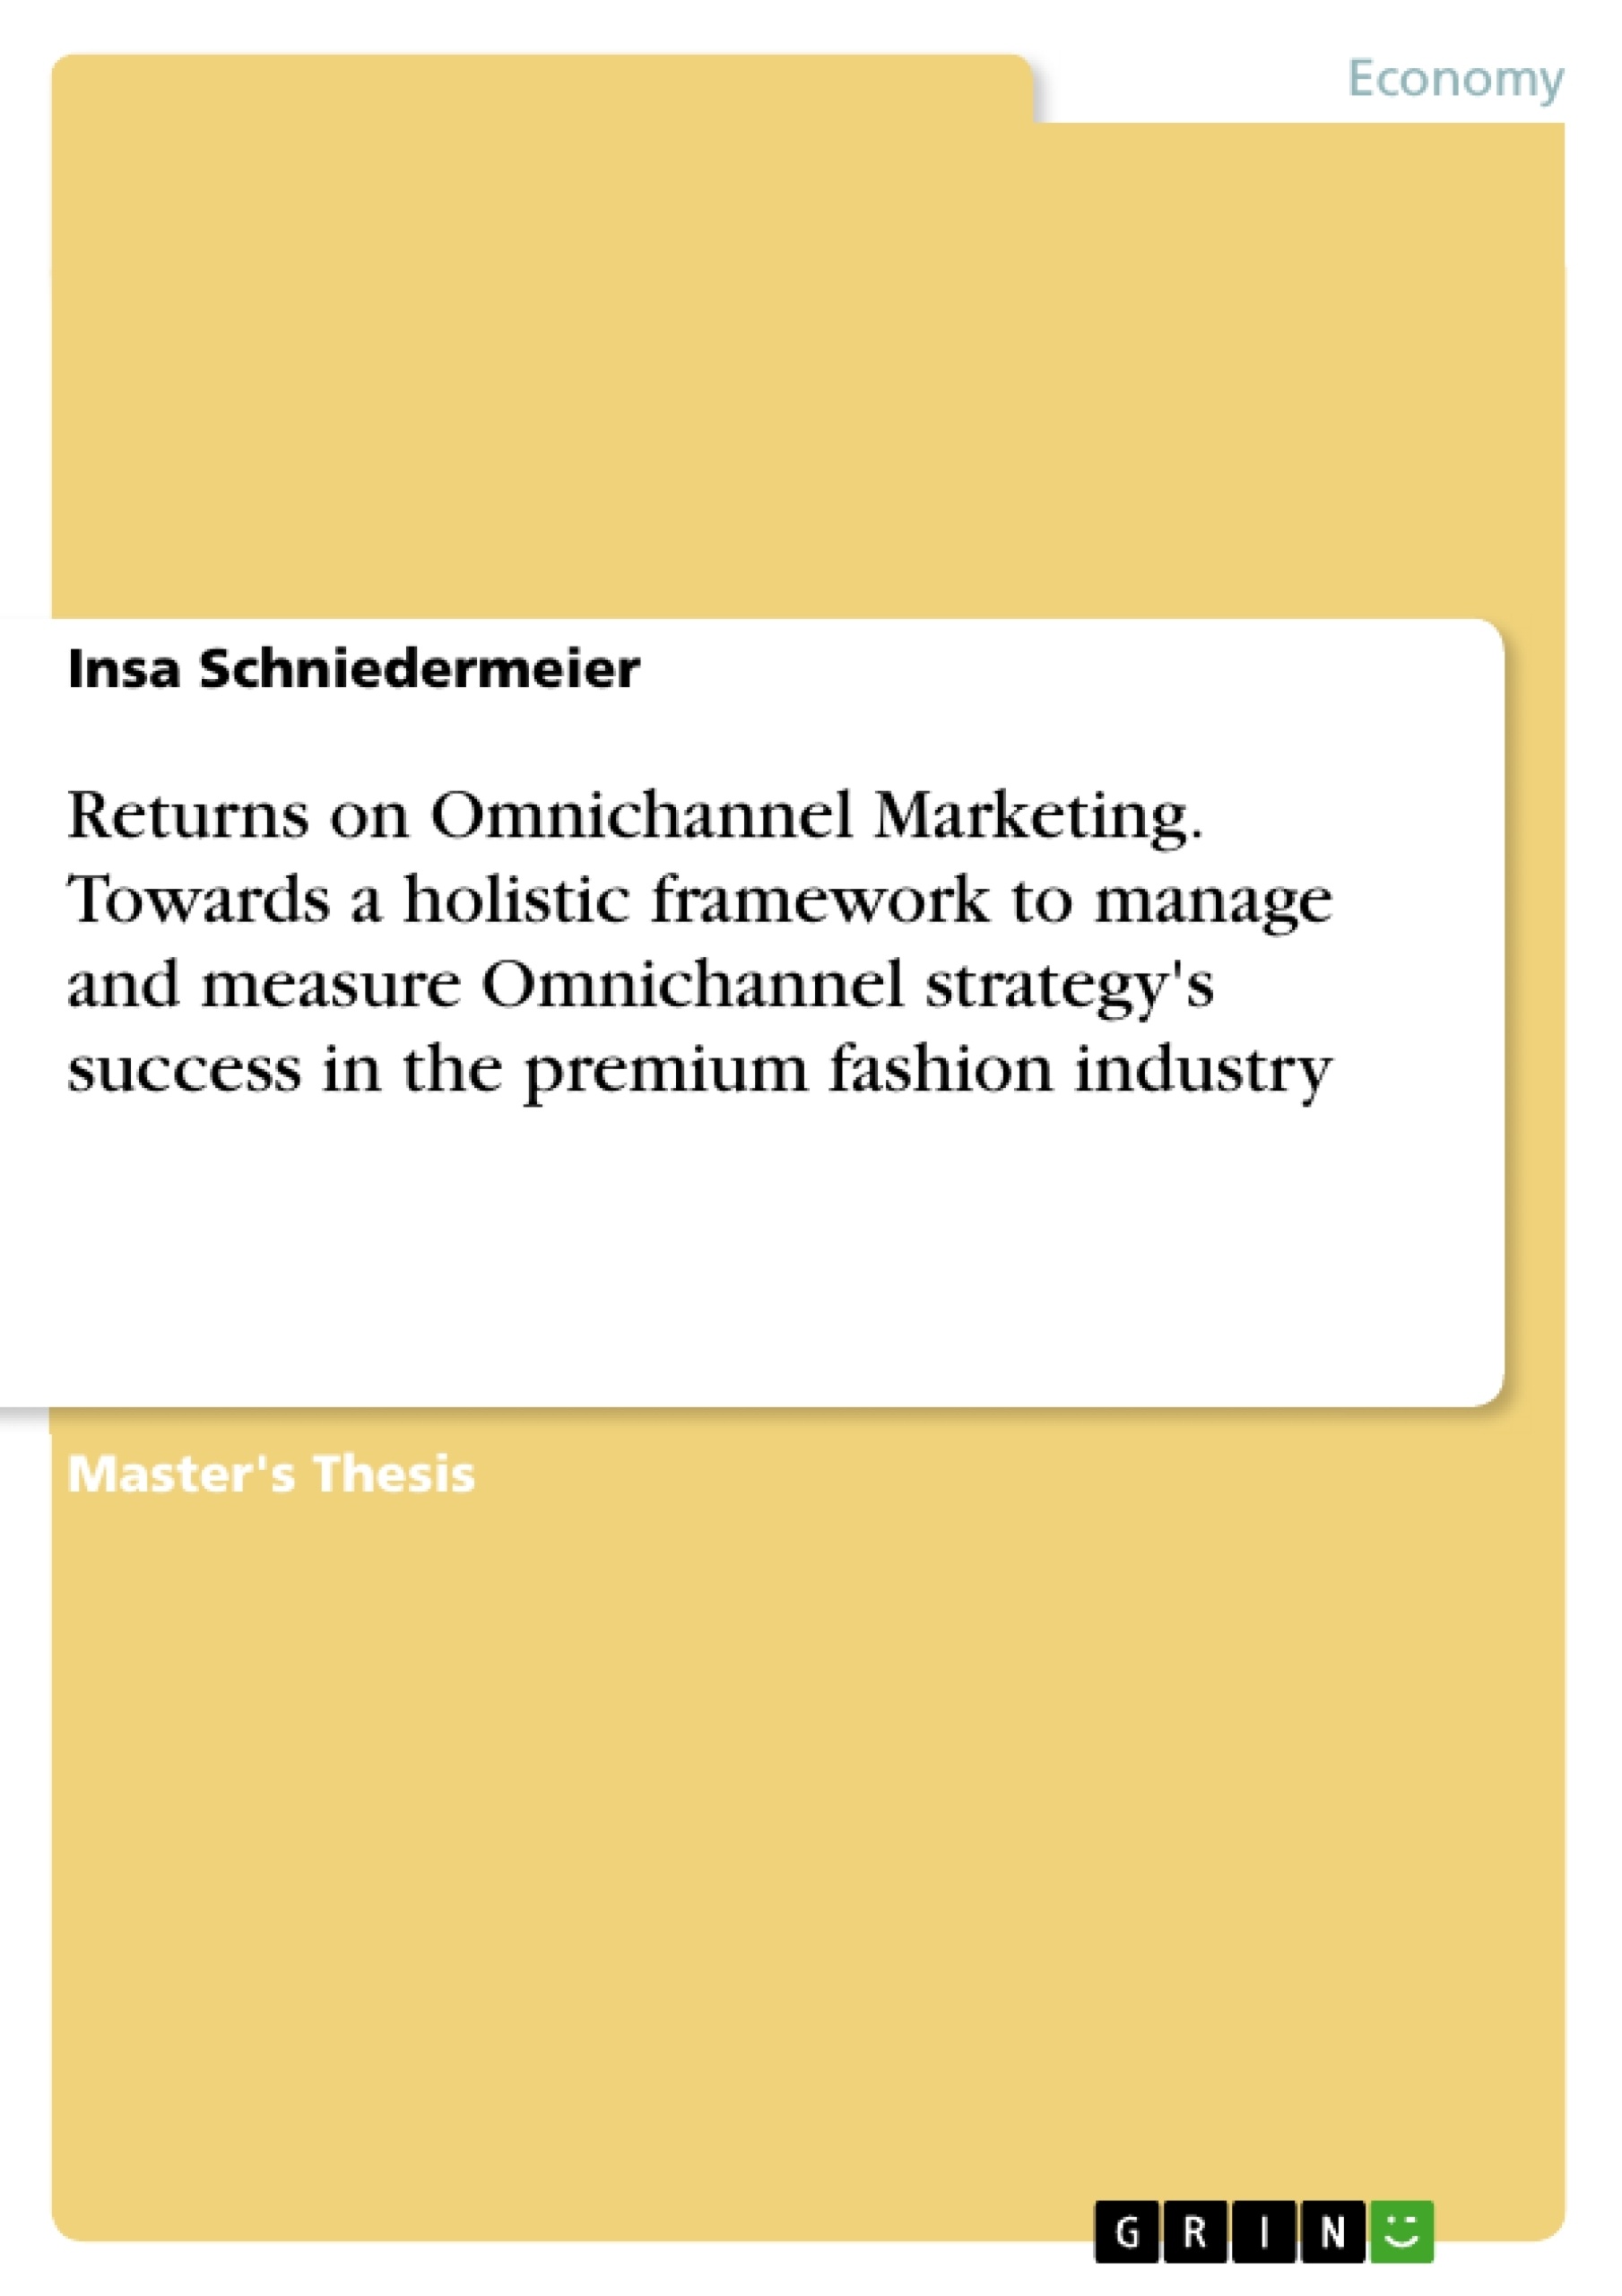 Titre: Returns on Omnichannel Marketing. Towards a holistic framework to manage and measure Omnichannel strategy's success in the premium fashion industry